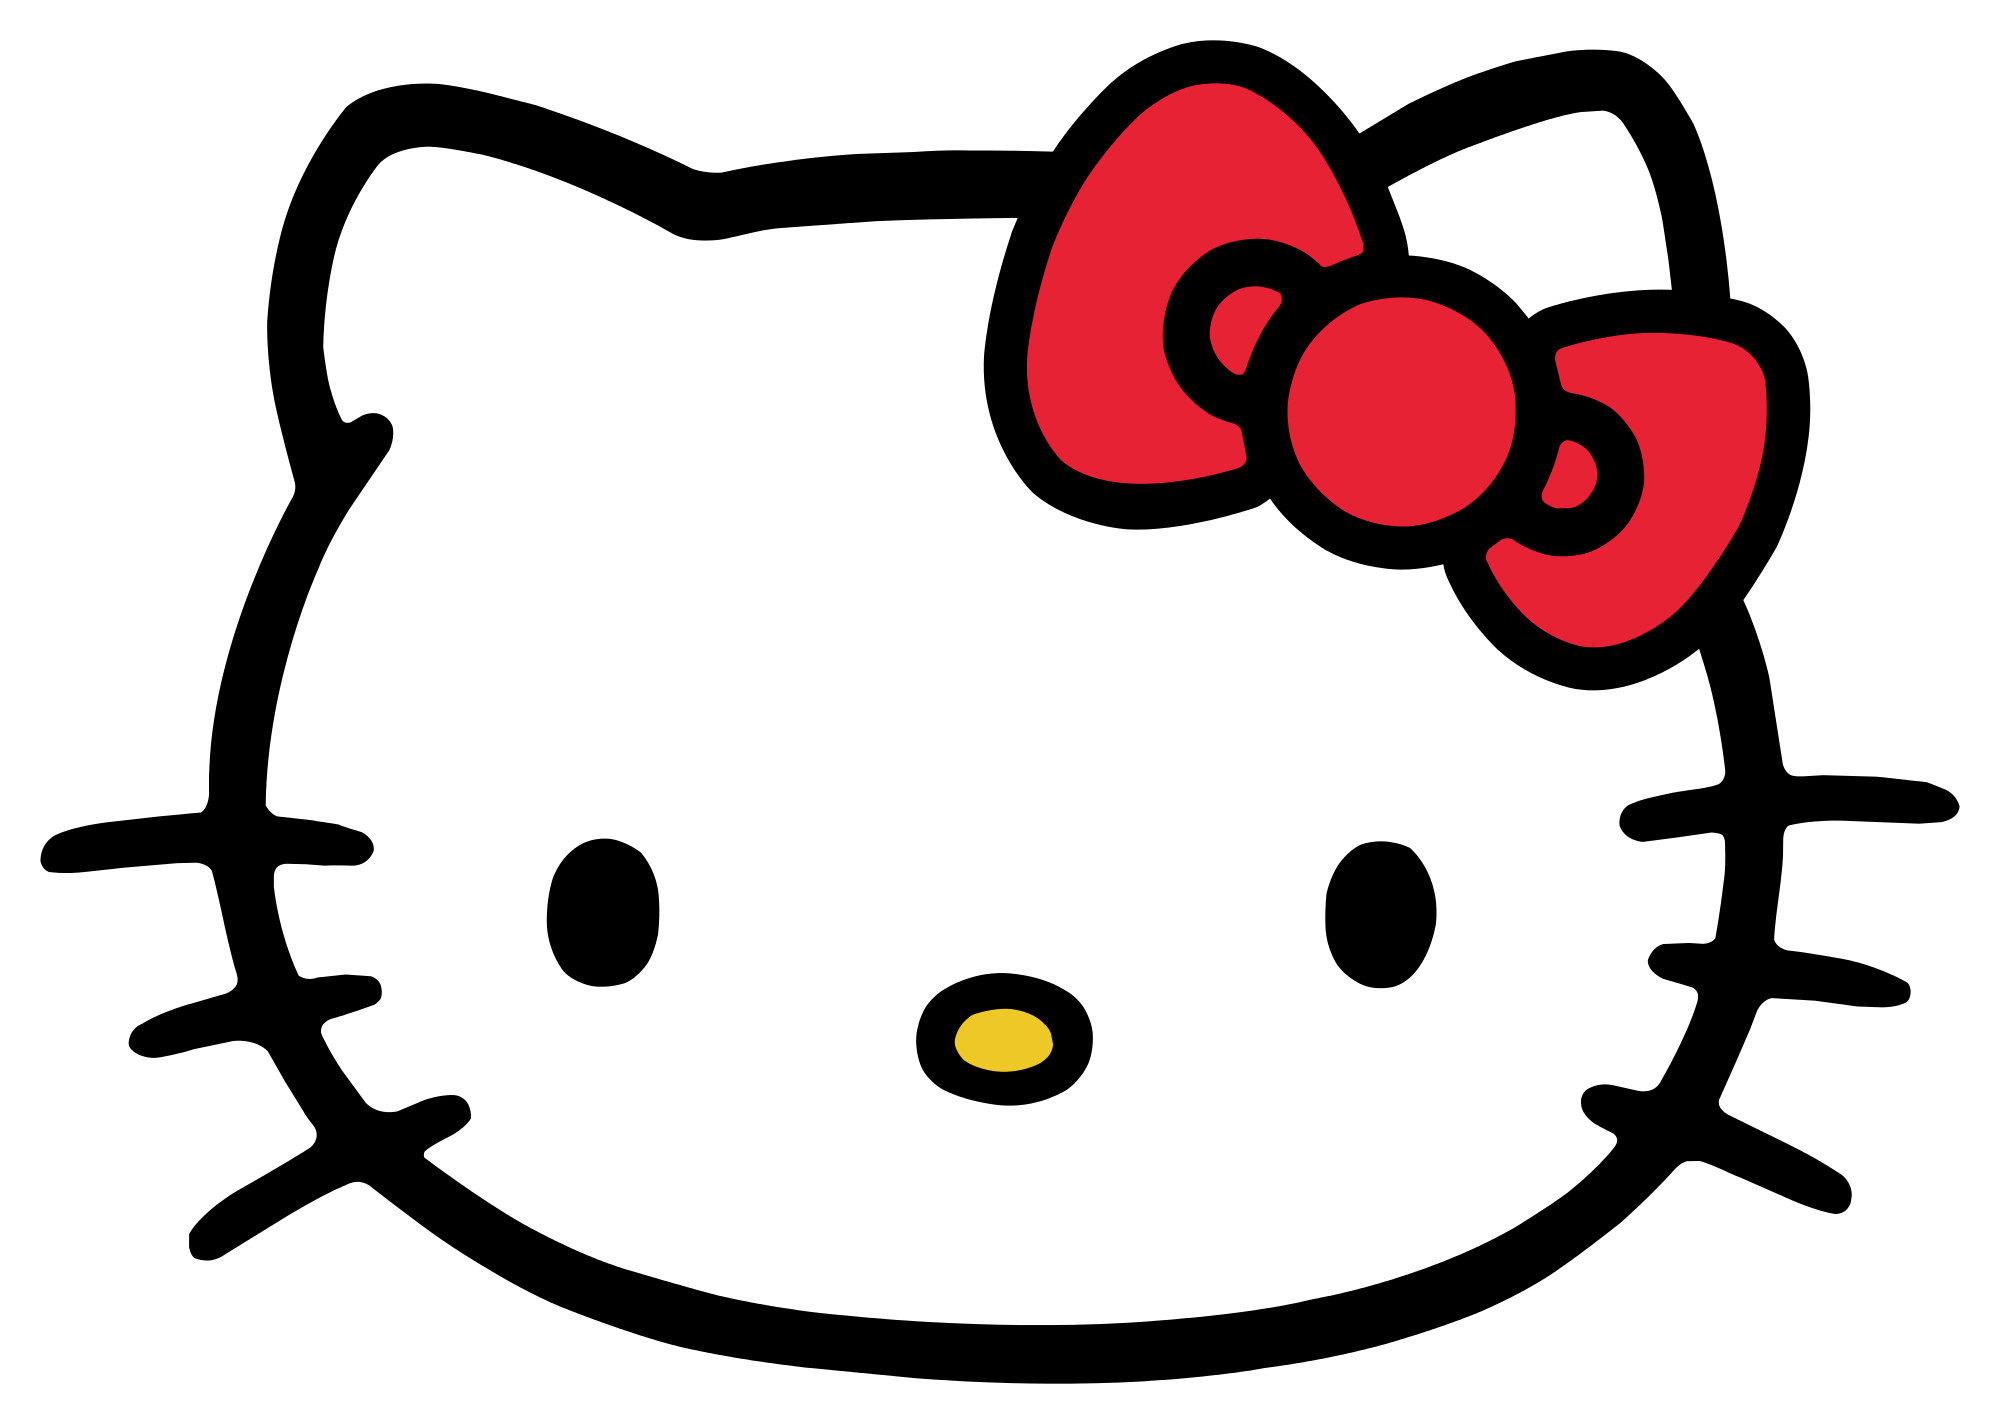 2000x1424 Hello Kitty Wallpapers in Best  Resolutions | Margorie Mccarville  QiGe Graphics